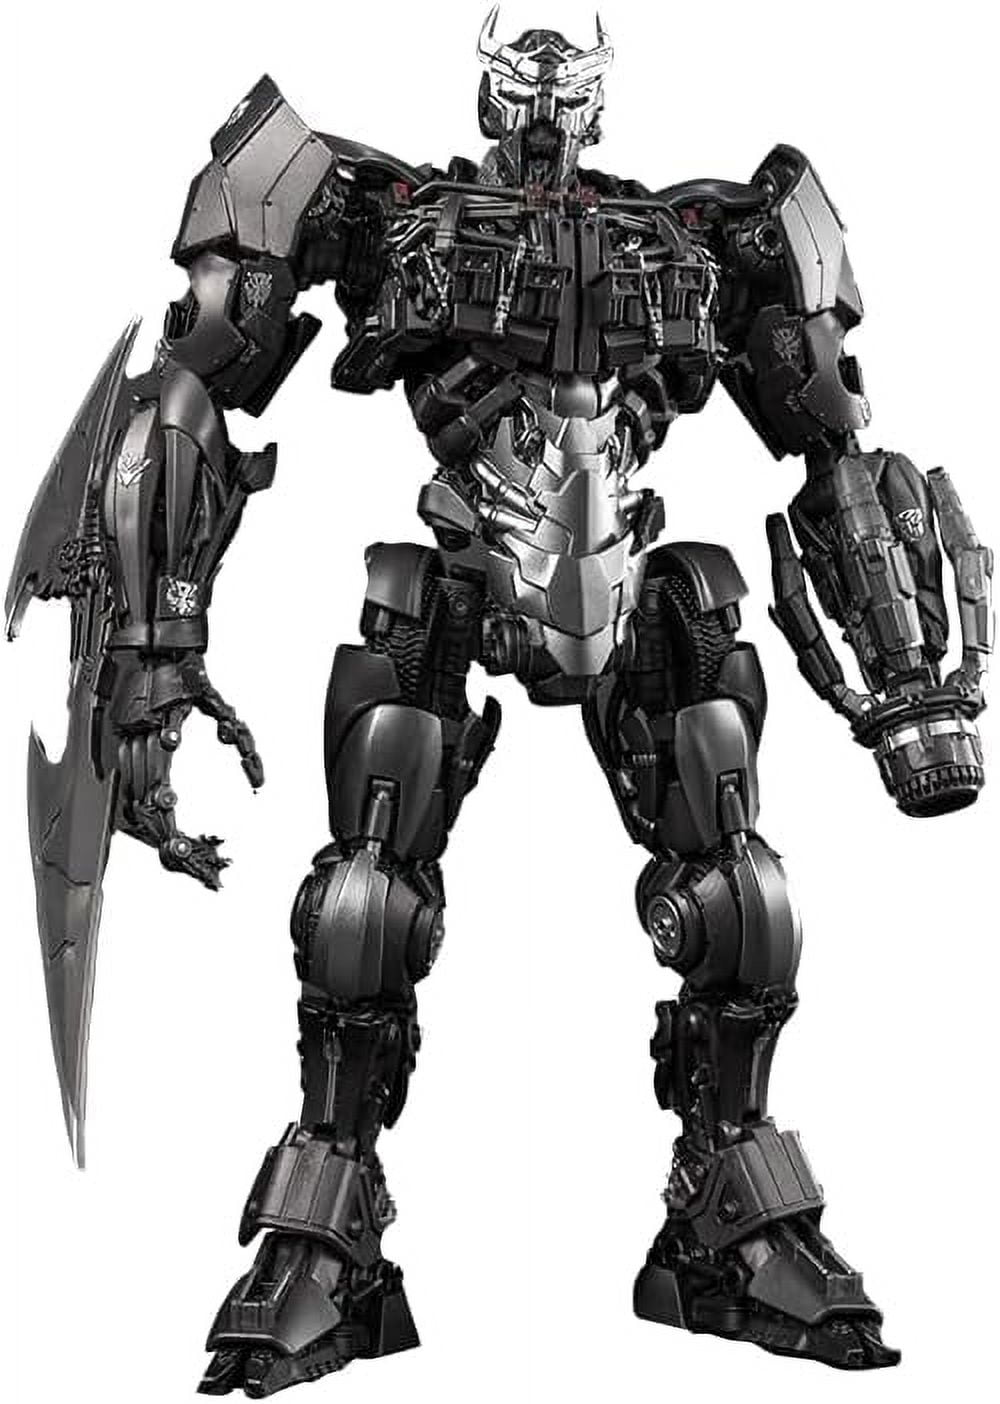 Yolopark Scourge Transformer Toys, Transformers Rise of The Beasts Action Figure, Highly Articulated 8.66 inch No Converting Model Kit, Great